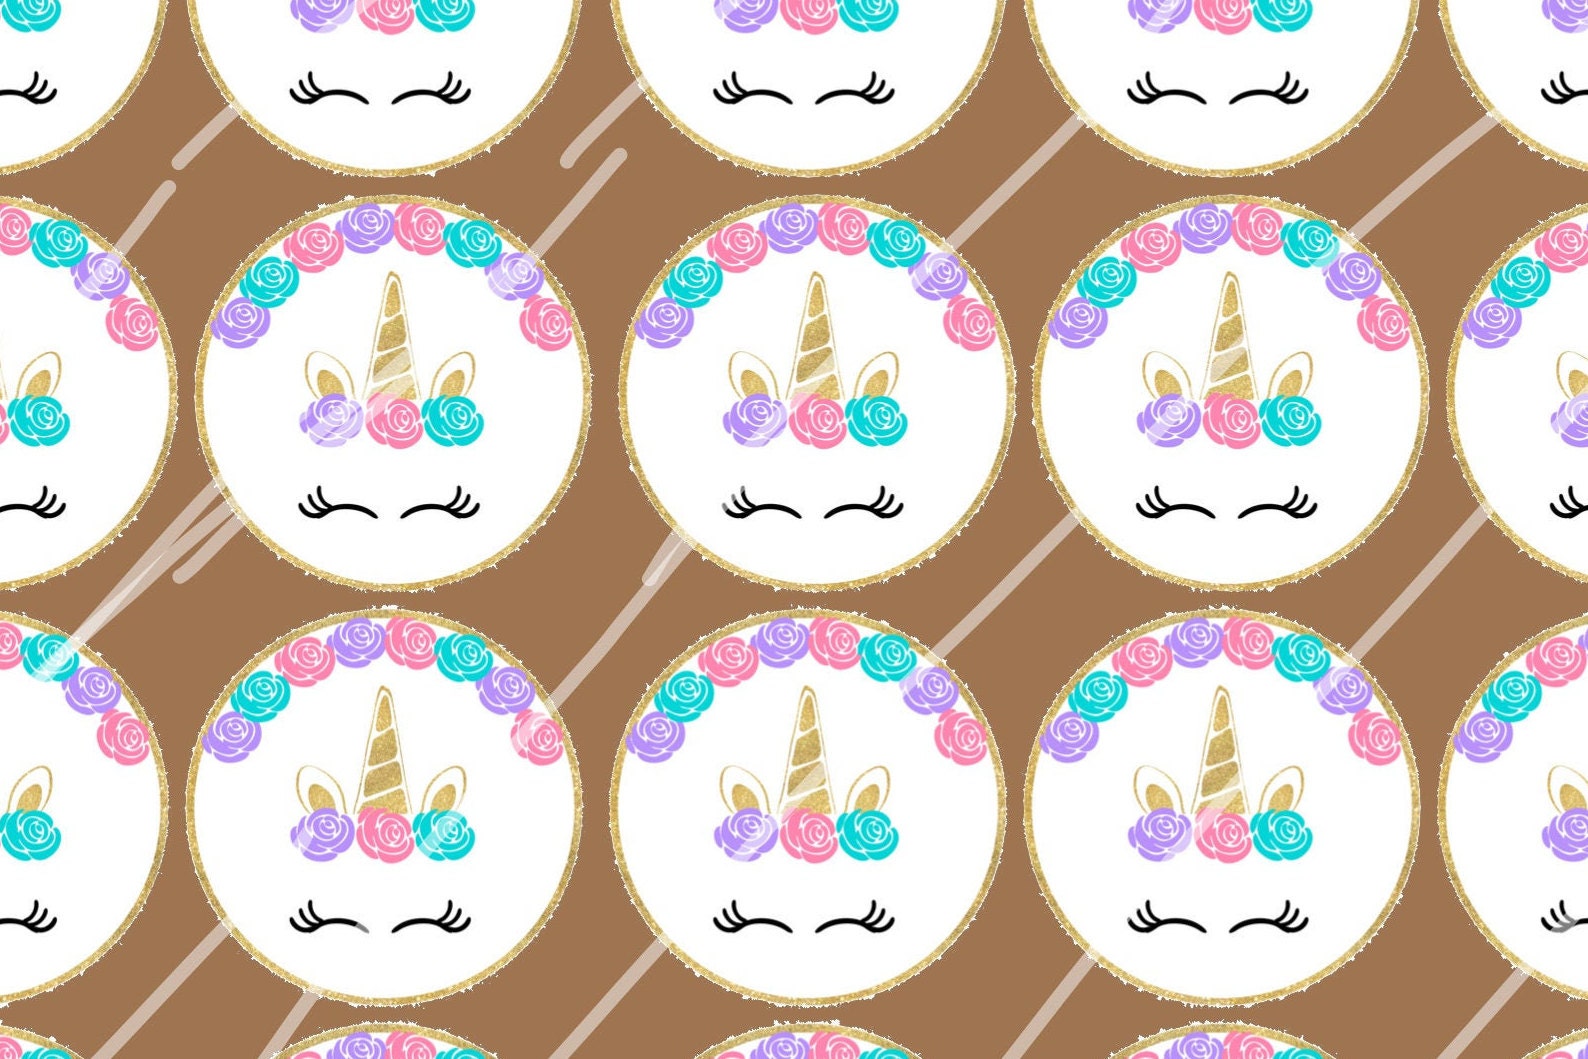 Unicorn Cupcake Toppers Instant Download Printable CUTE | Etsy